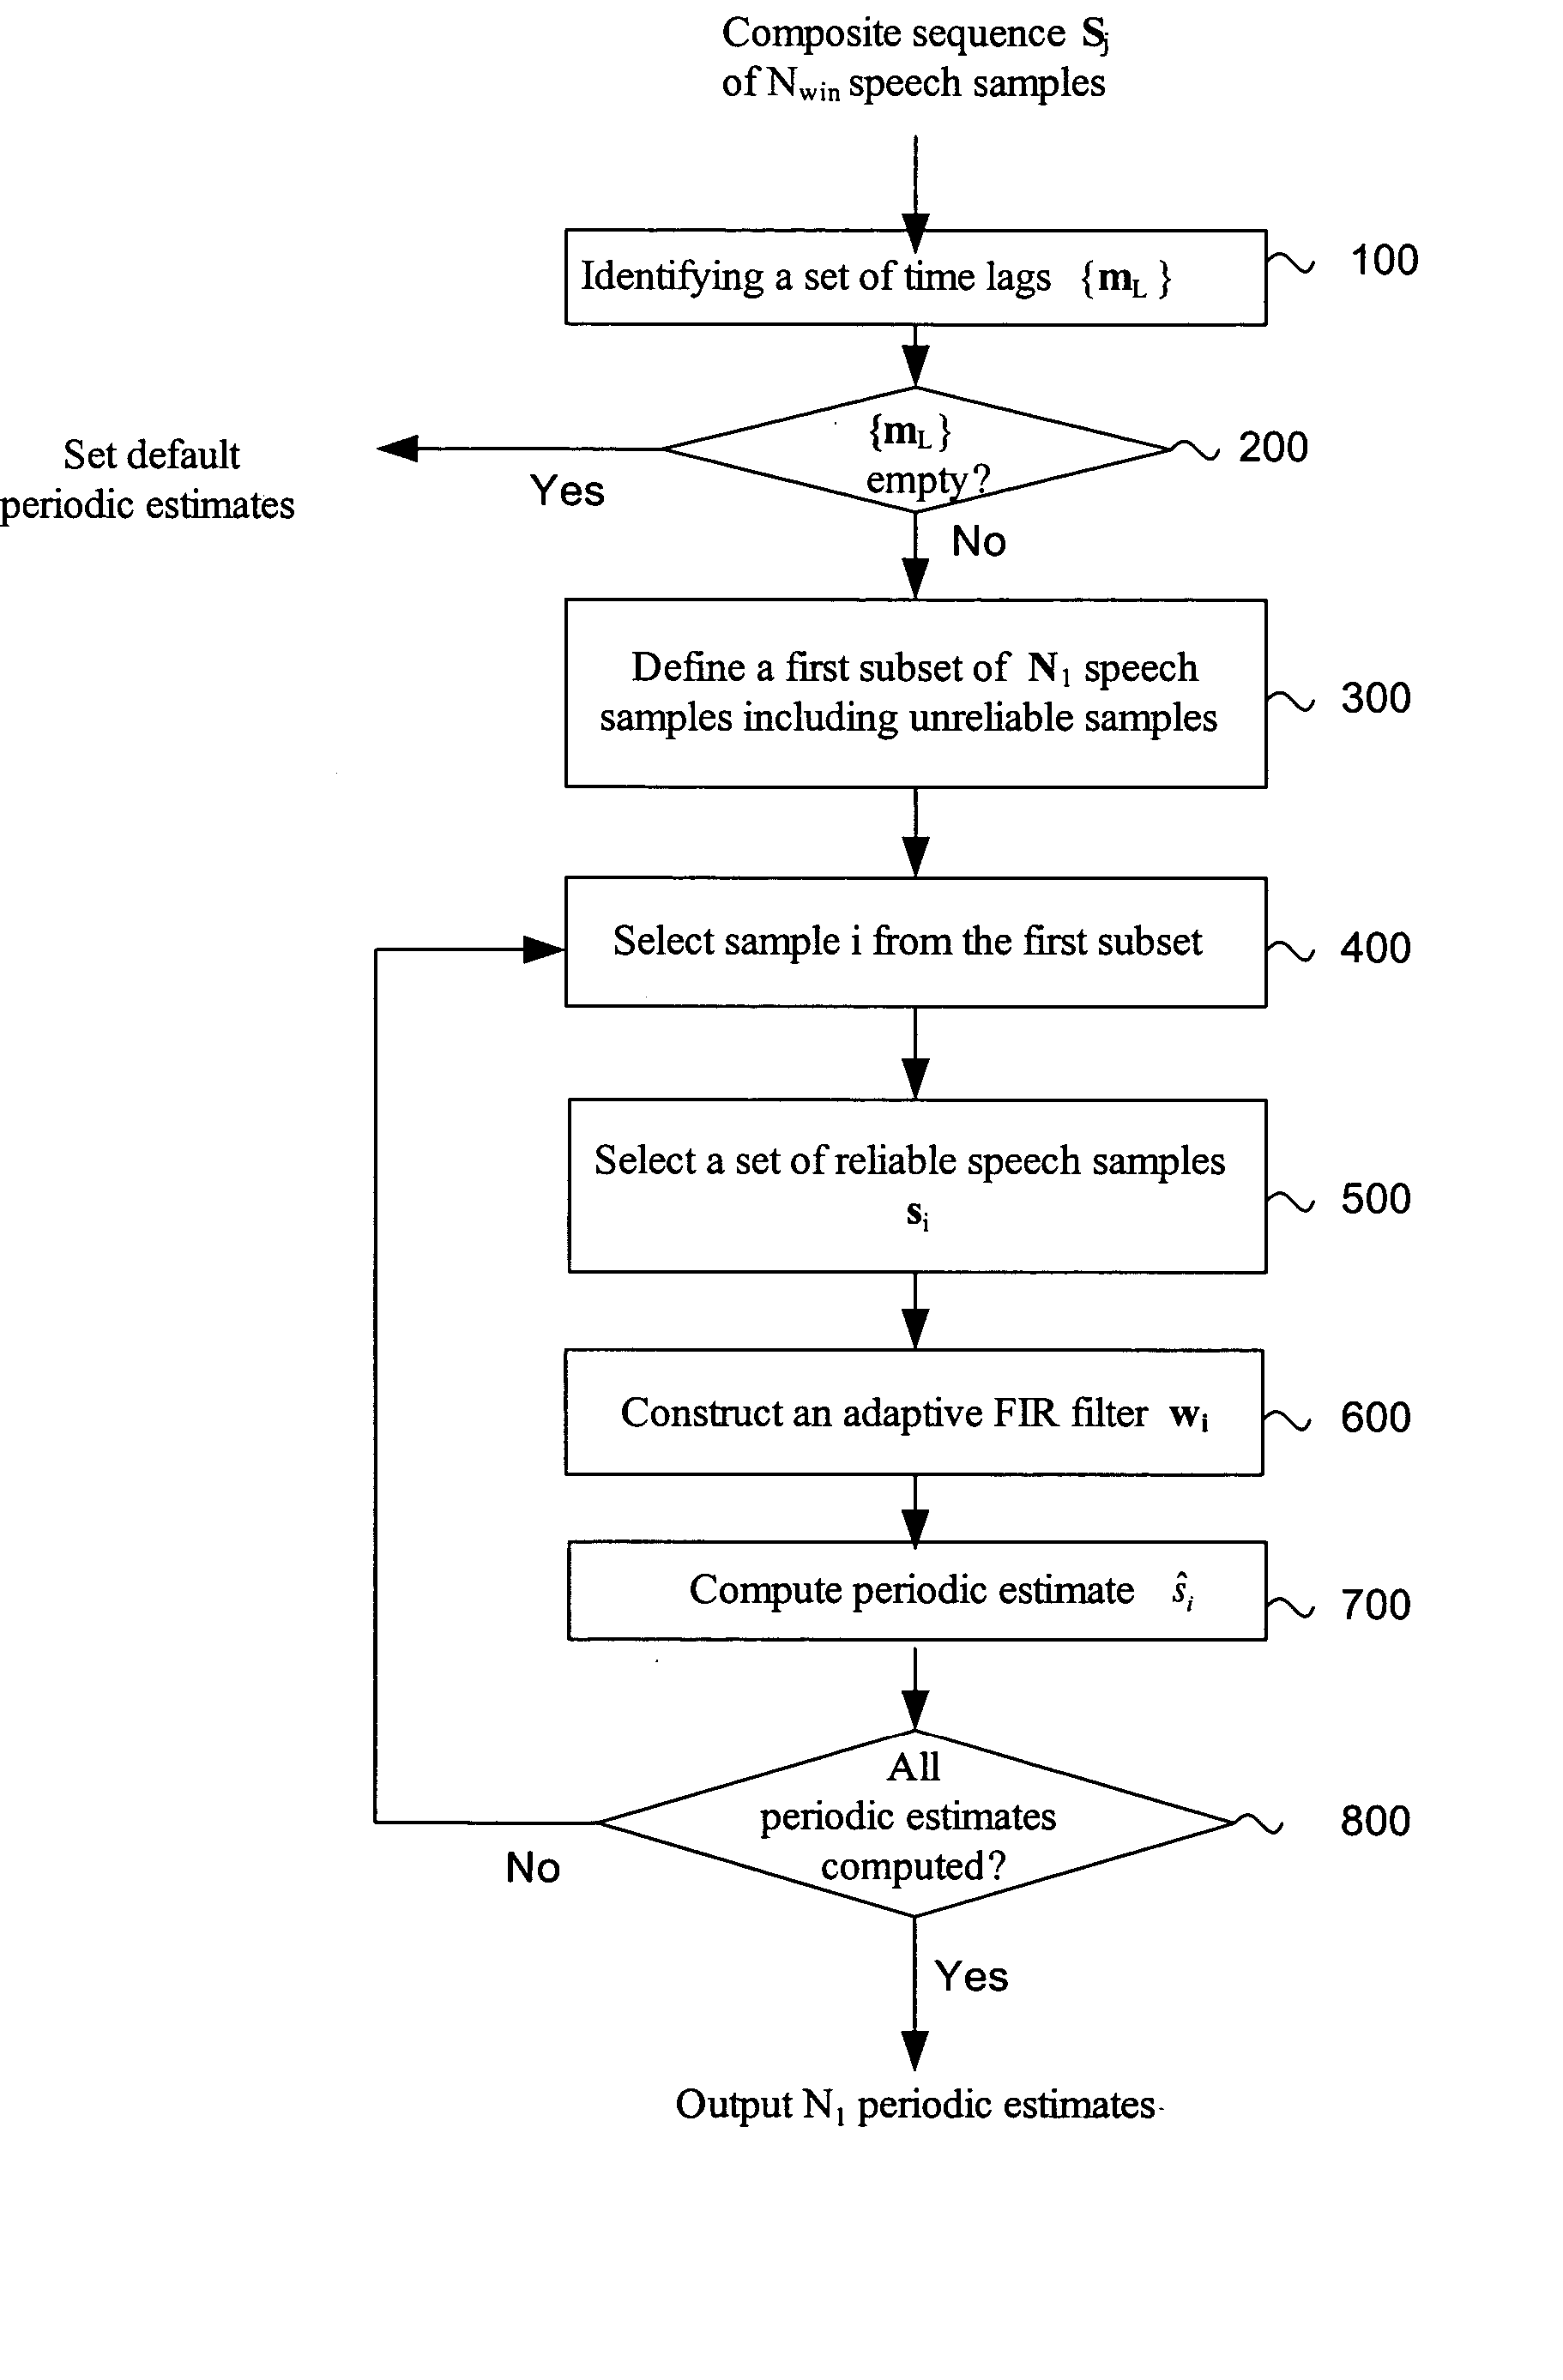 Method for recovery of lost speech data